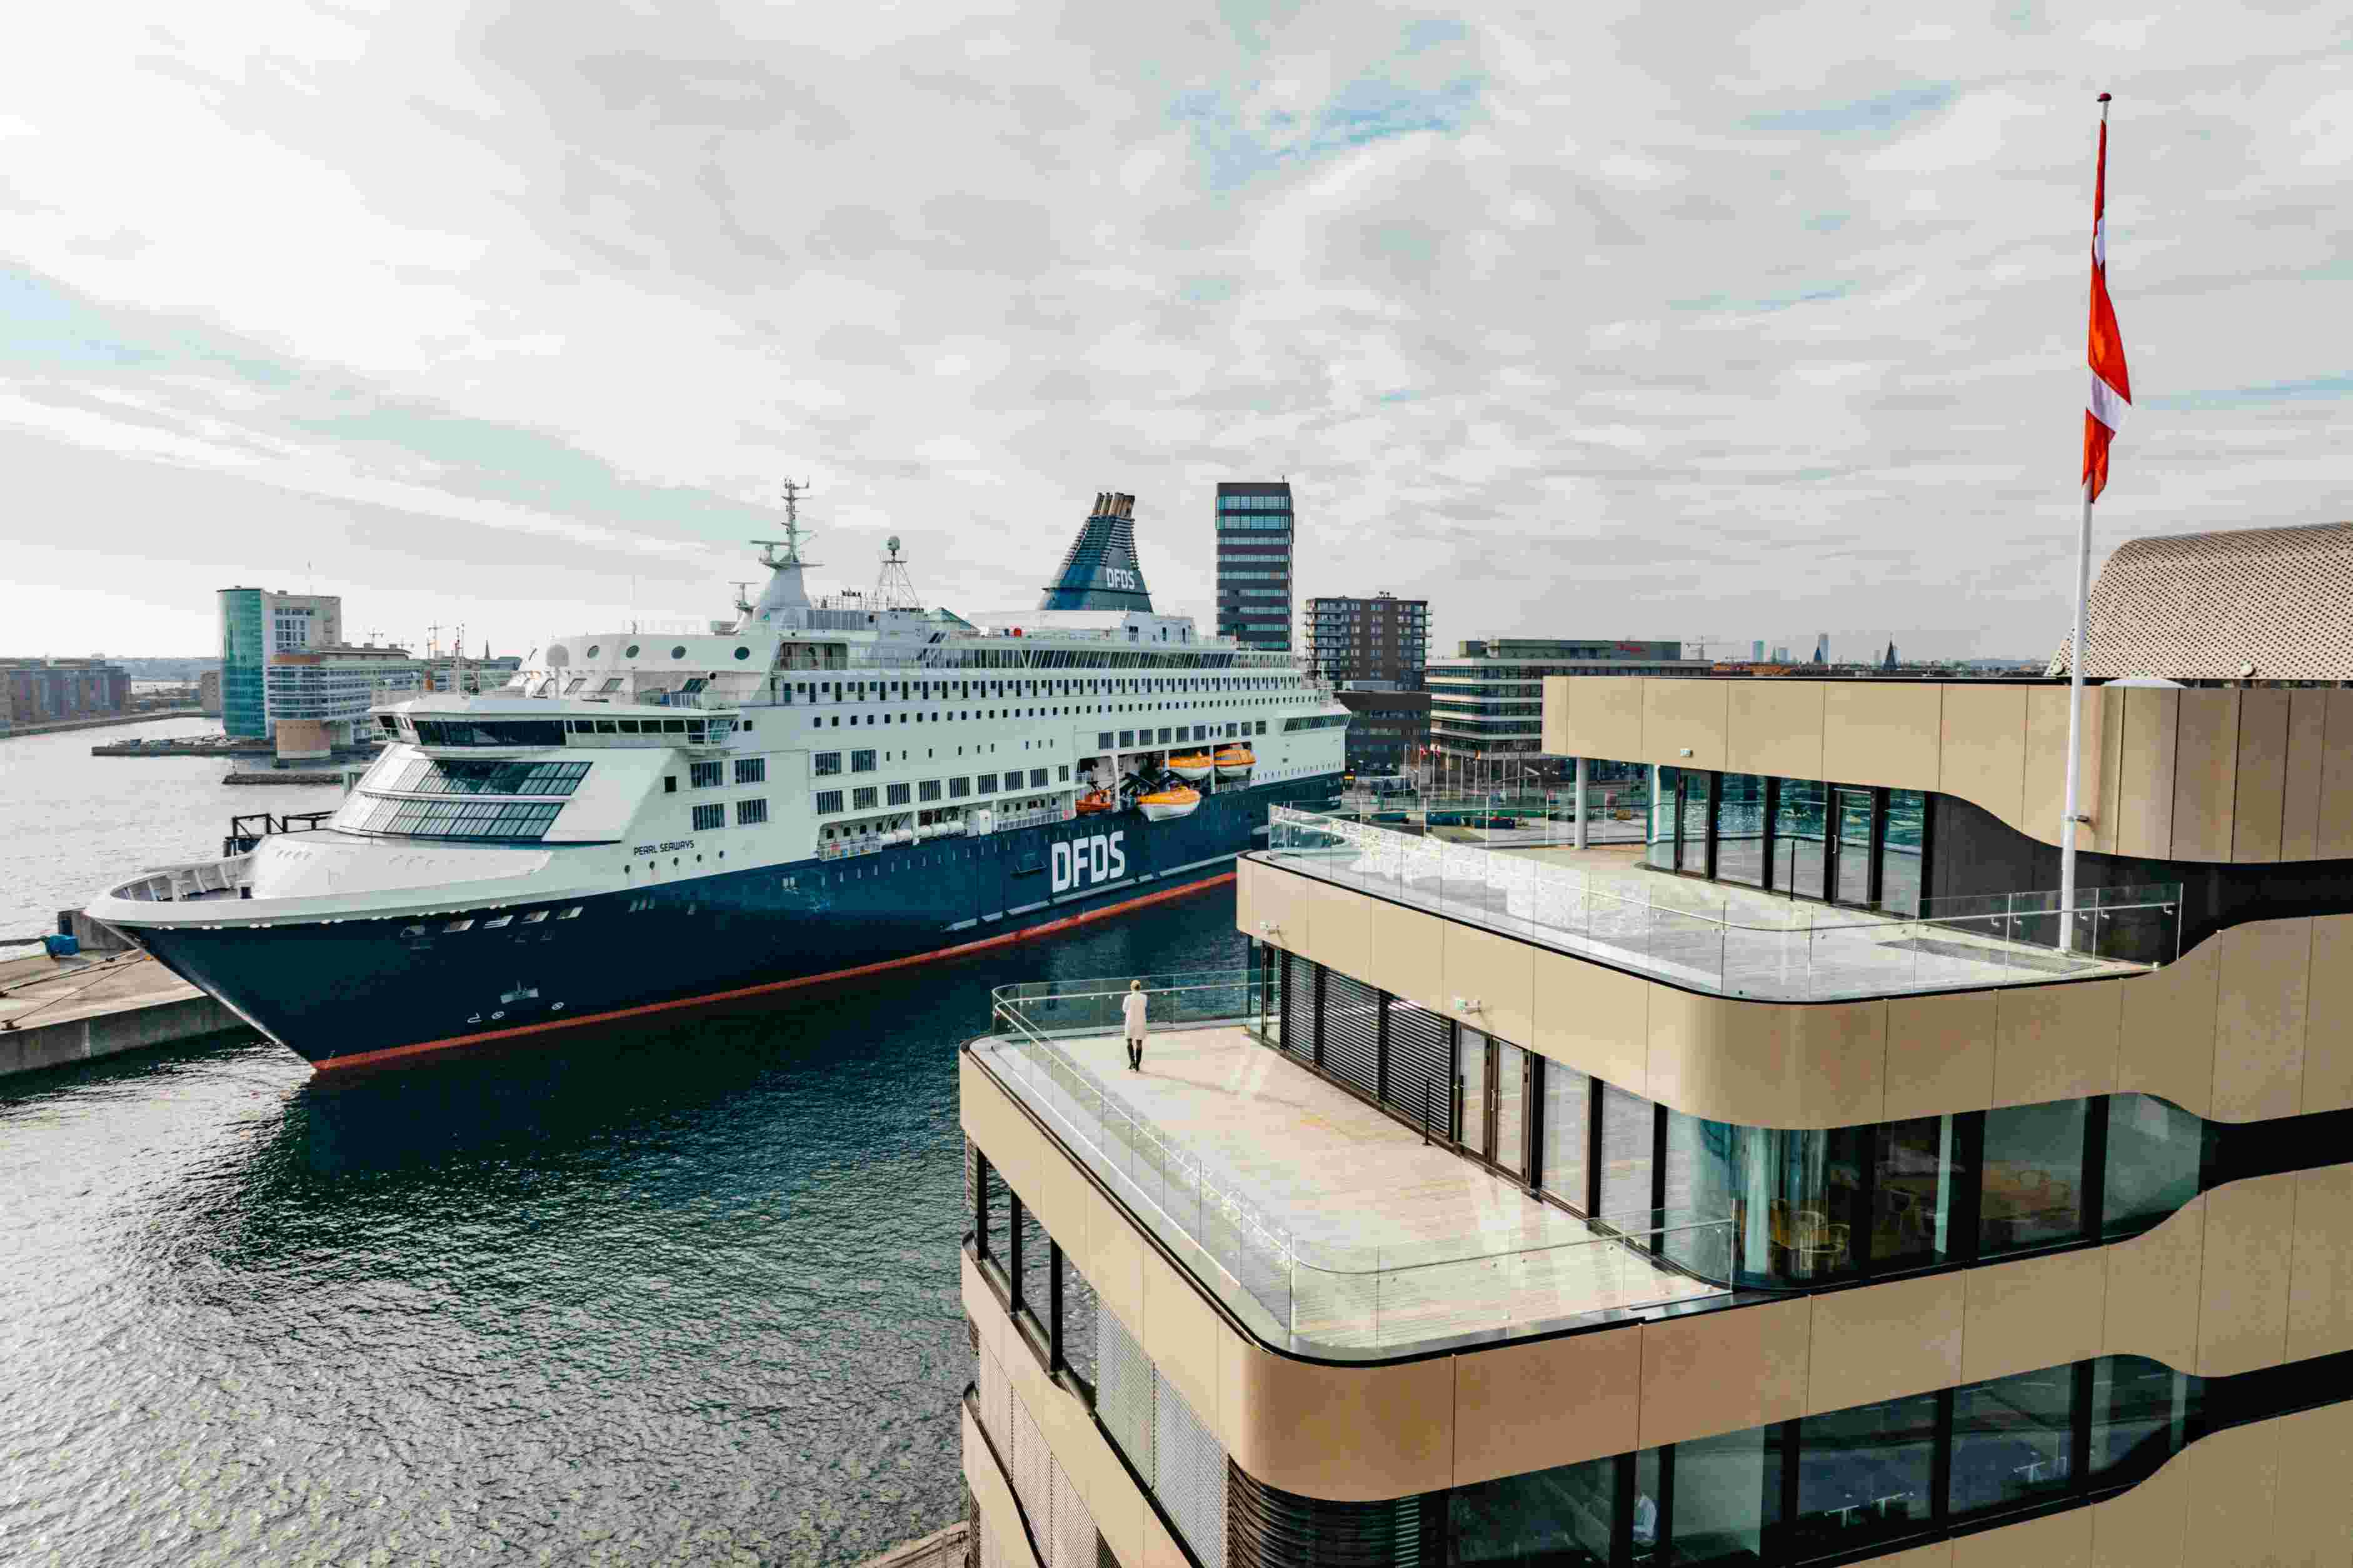 DFDS HQ Drone 03 2022 0257 300KB